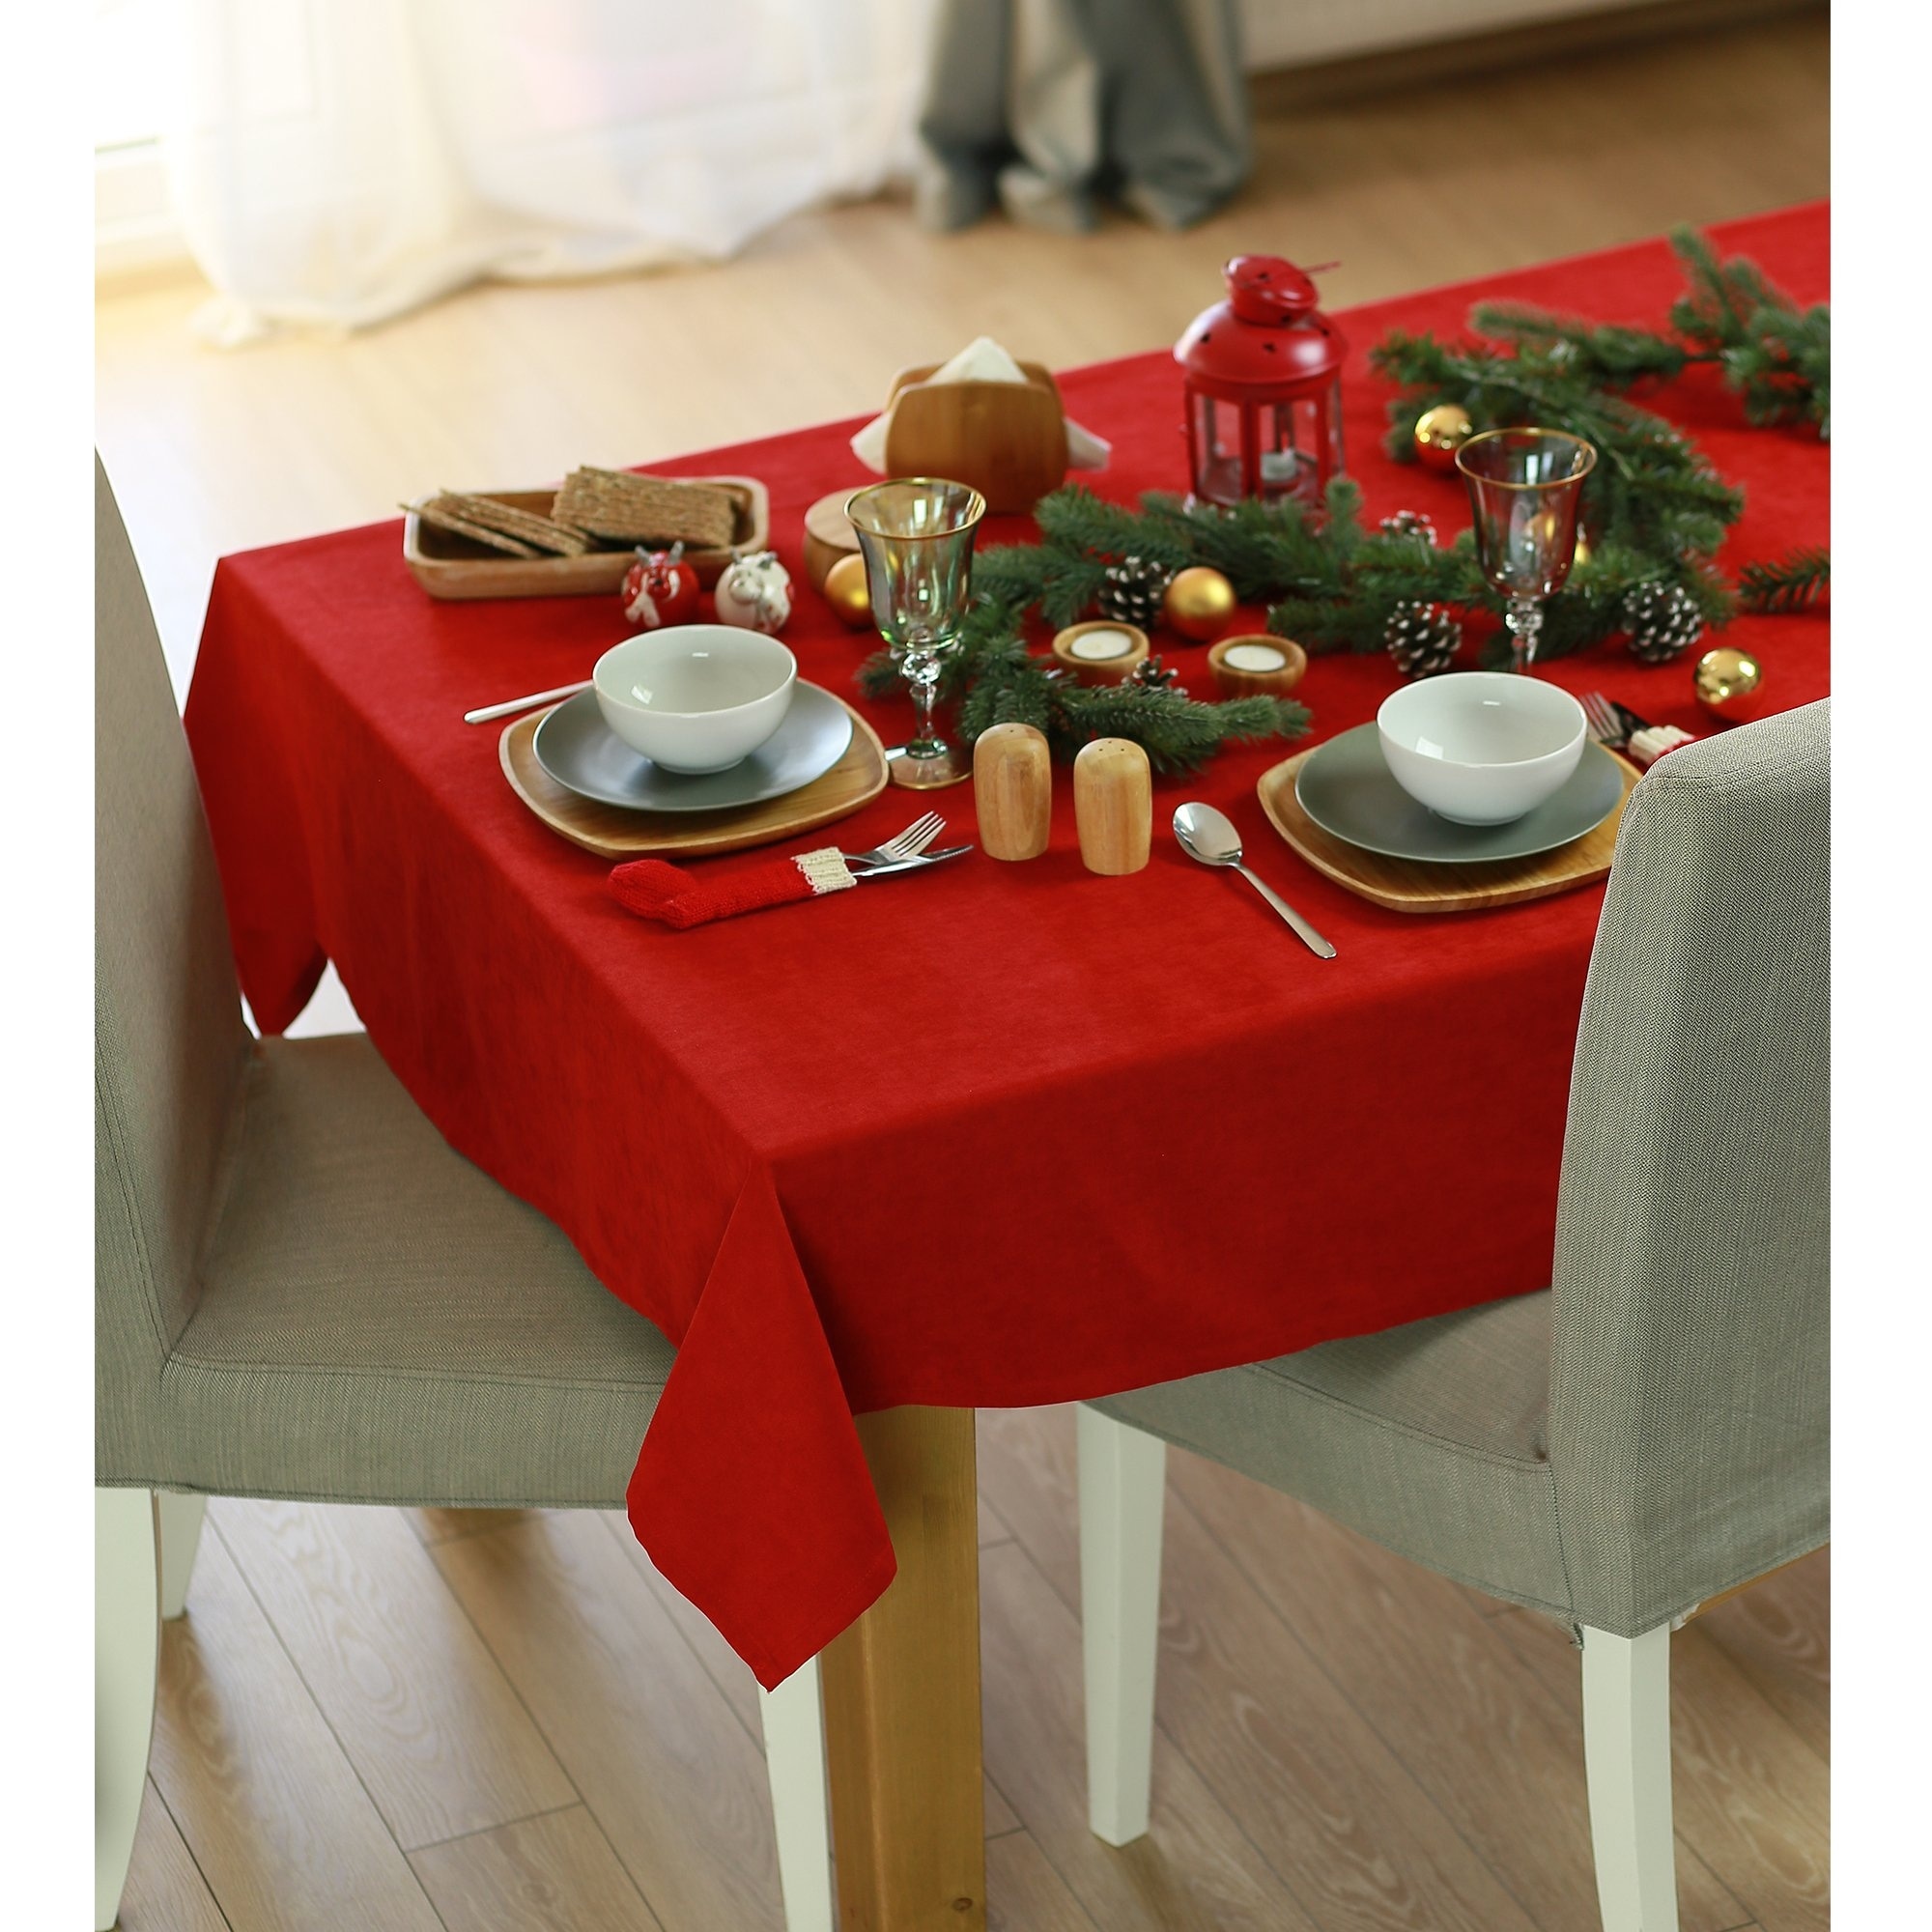 Wamika Merry Christmas Buffalo Plaid Santa Claus Tablecloth Table Cover Mat Home Decoration Winter Reindeer Rectangle Table Cloth Linen Cover Placemat 60 W x 108 L Kitchen Dining Room Party Wedding 